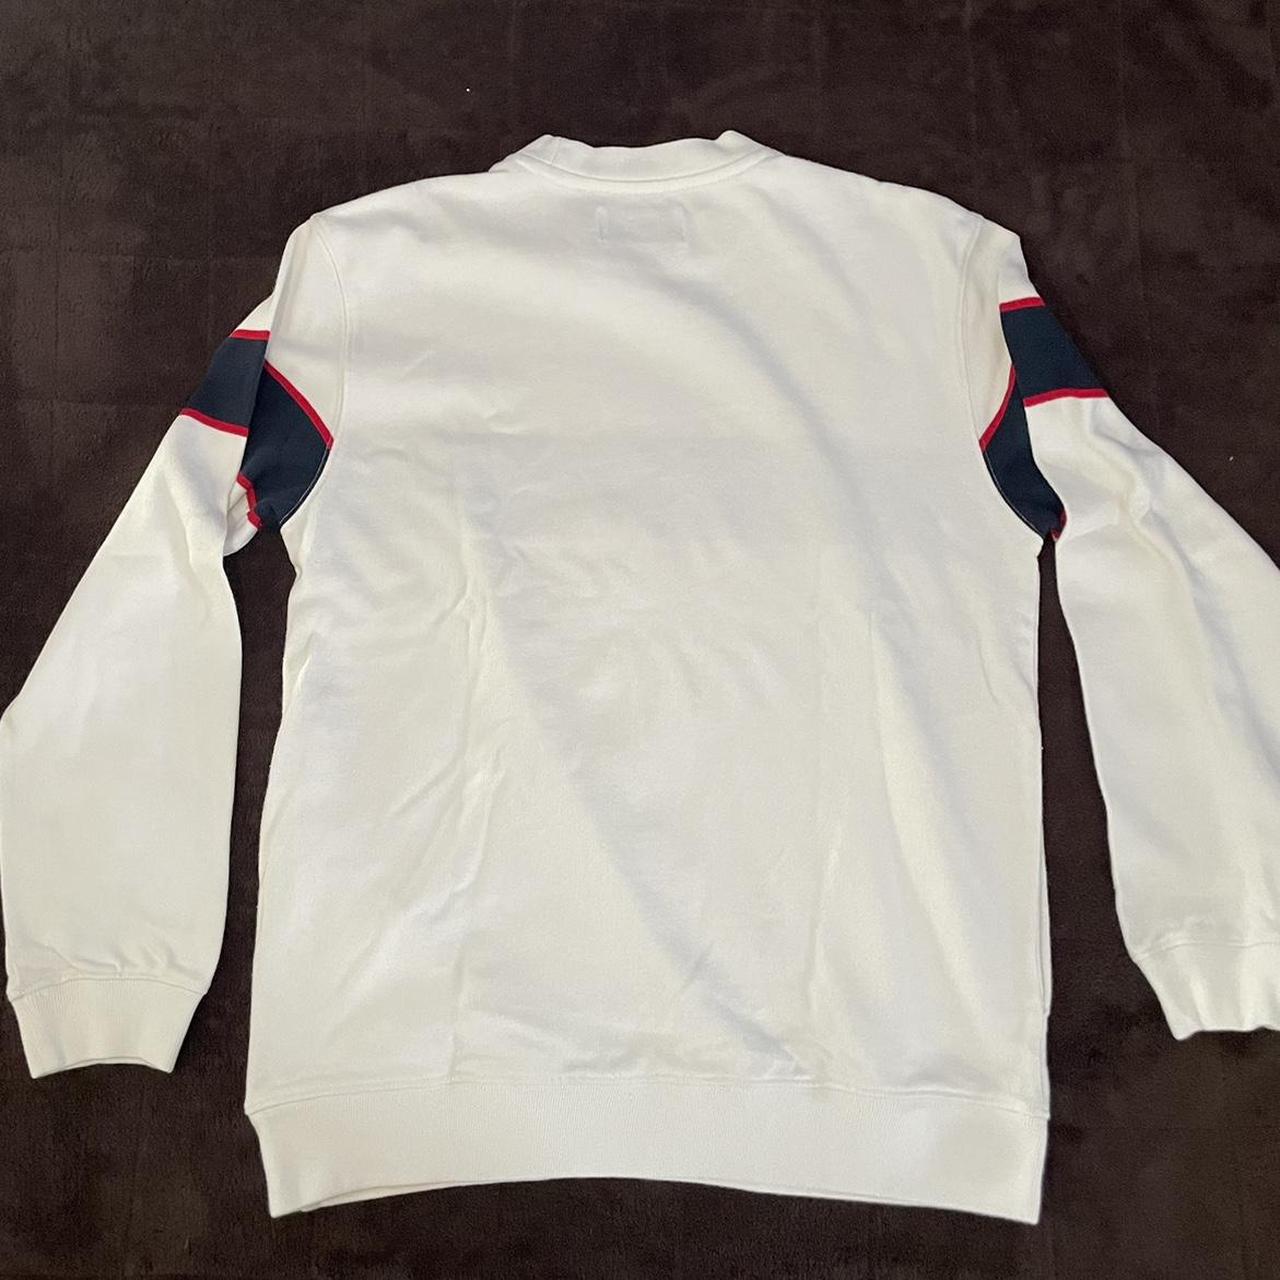 Palace Men's White and Red Sweatshirt (3)